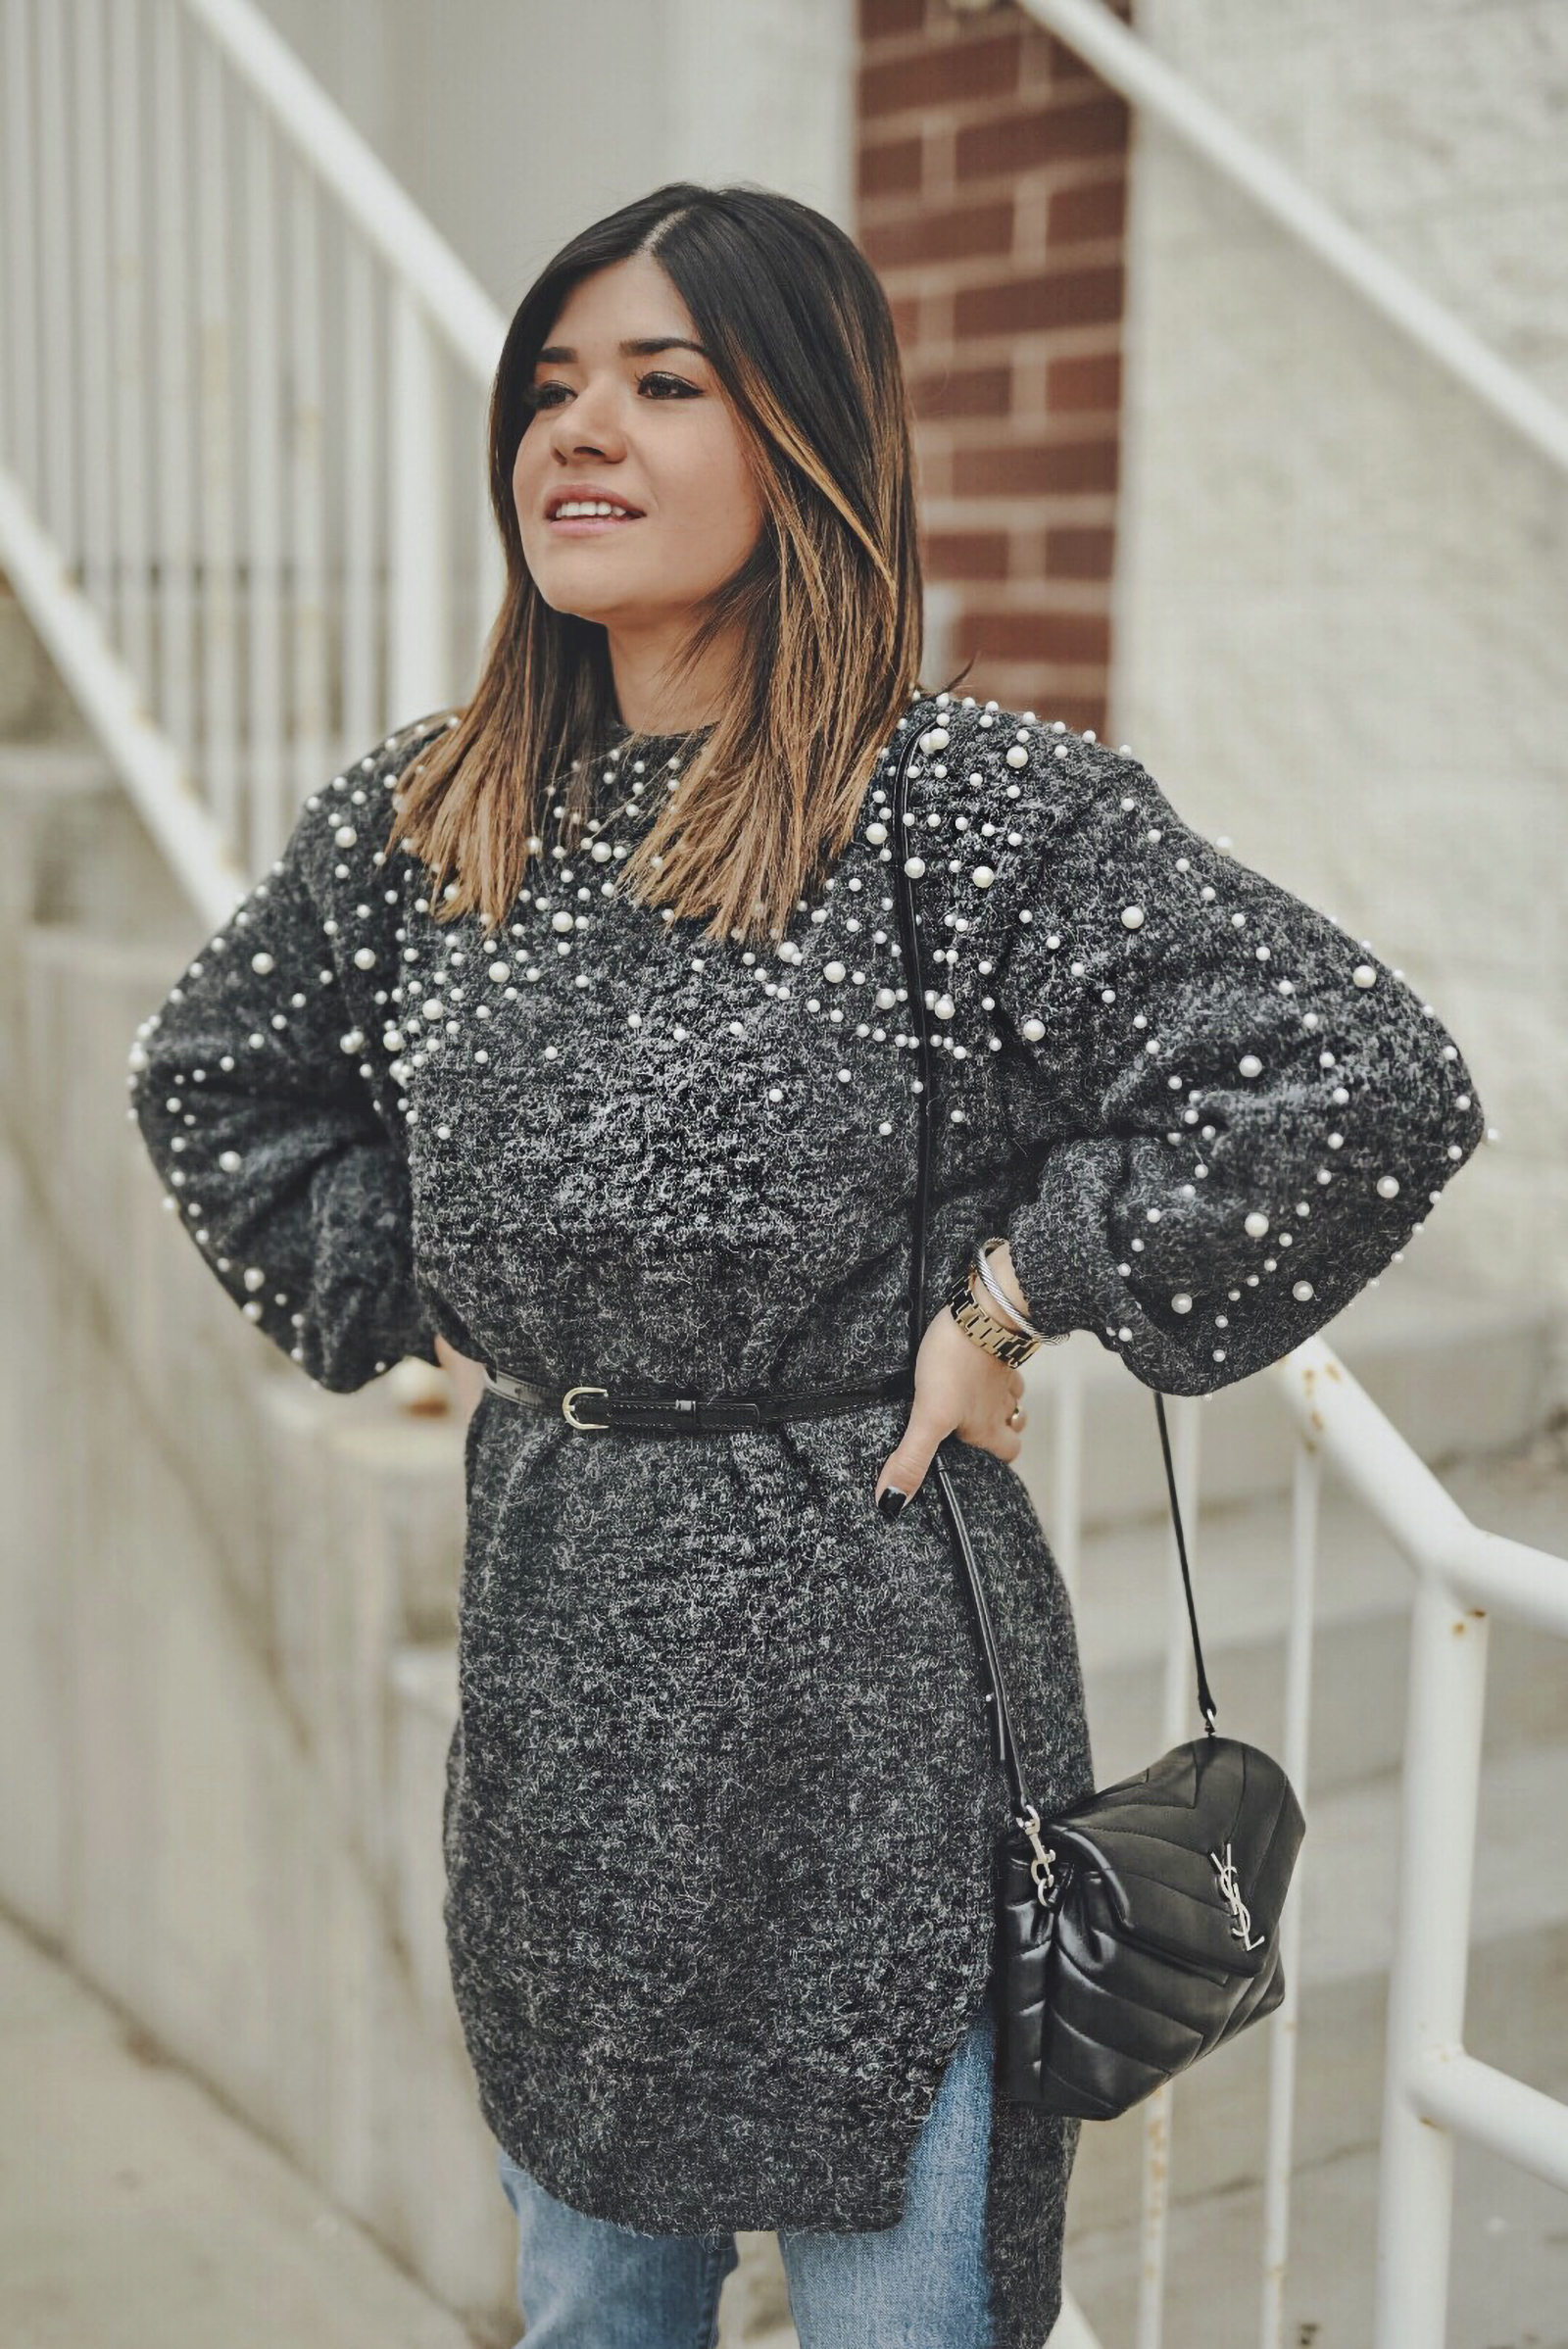 HOW TO STYLE SWEATER DRESSES WITH JEANS, chictalk | CHIC TALK